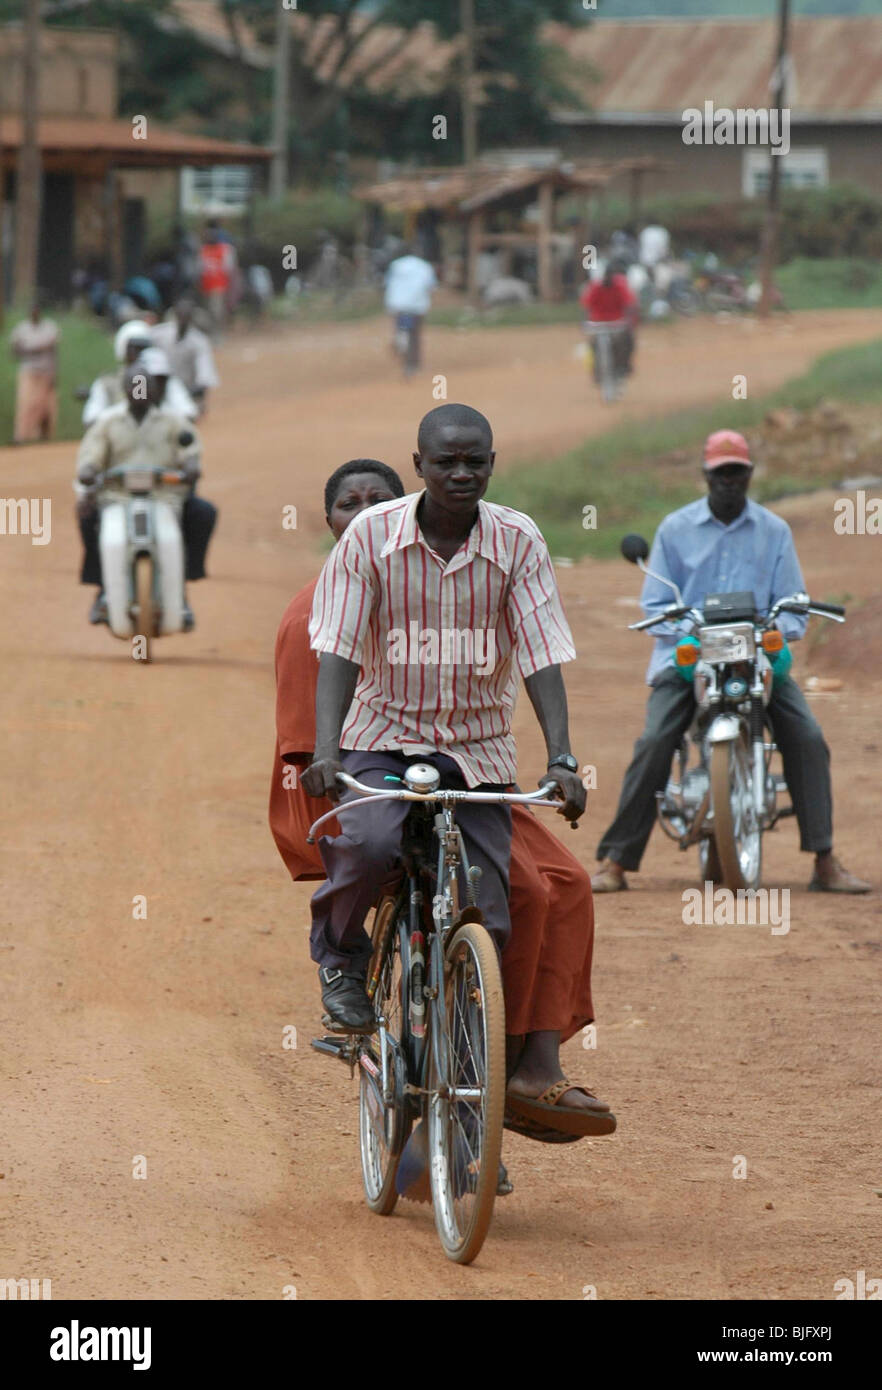 Modes of transport on Africa's dusty roads. A gentlemen gives his friend a lift through the town on his bicycle. Uganda Stock Photo